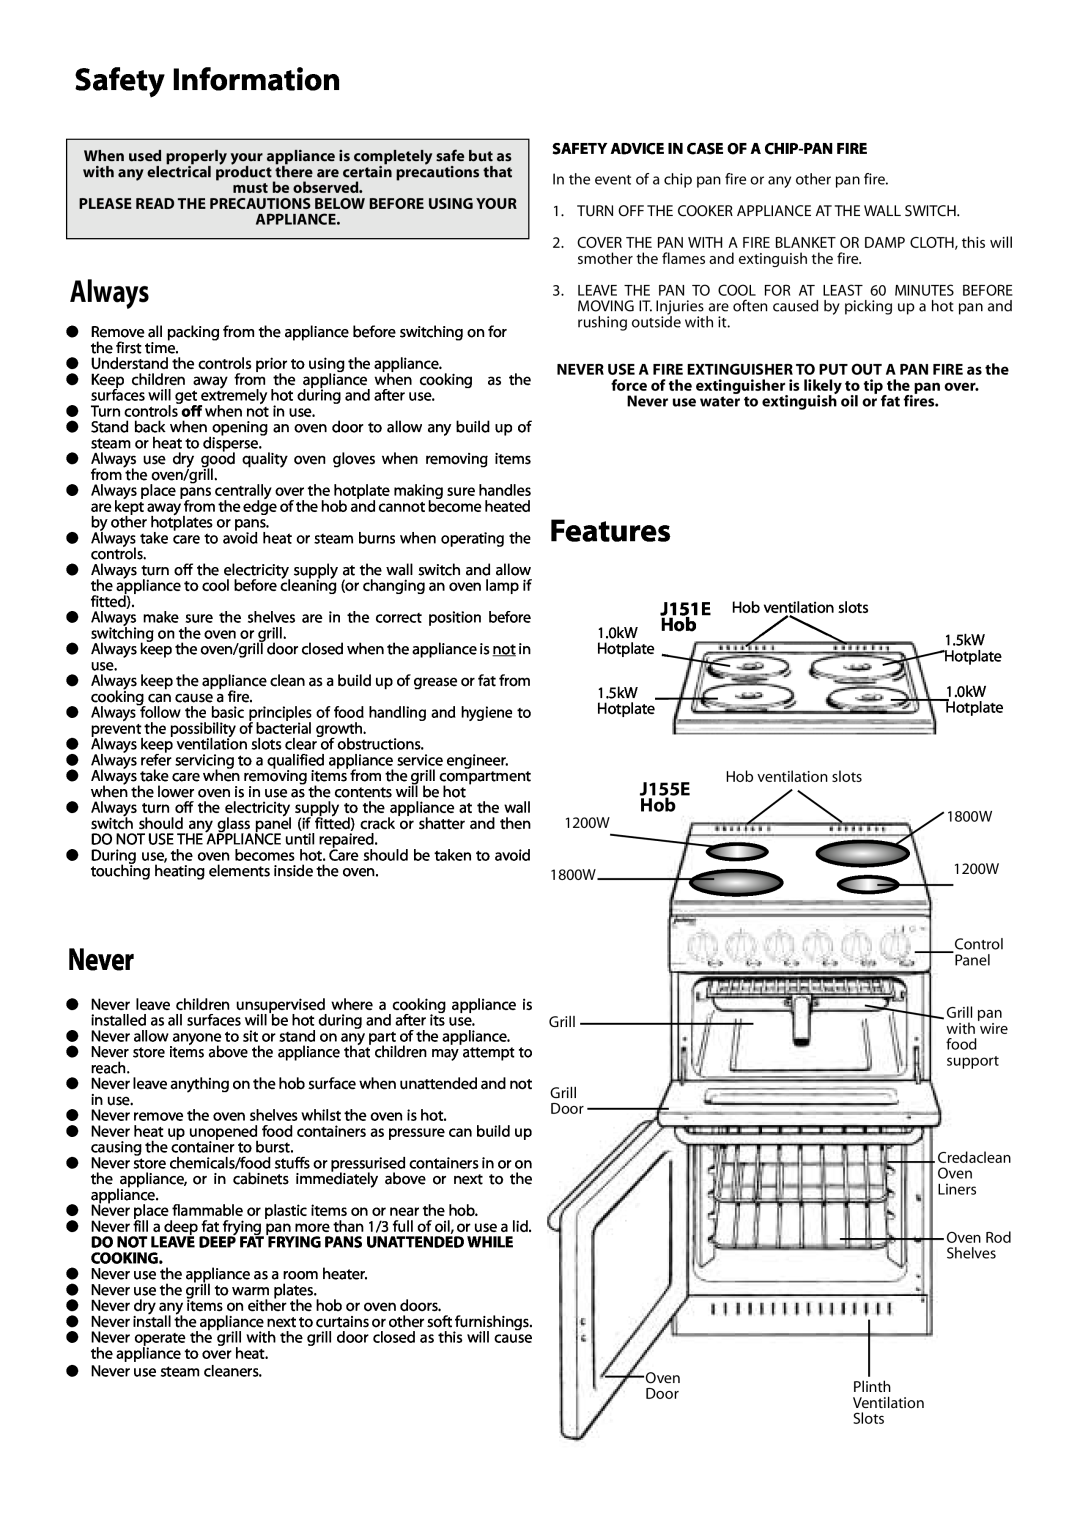 Creda J151E installation instructions Safety Information, Always, Never, Features, J155E 